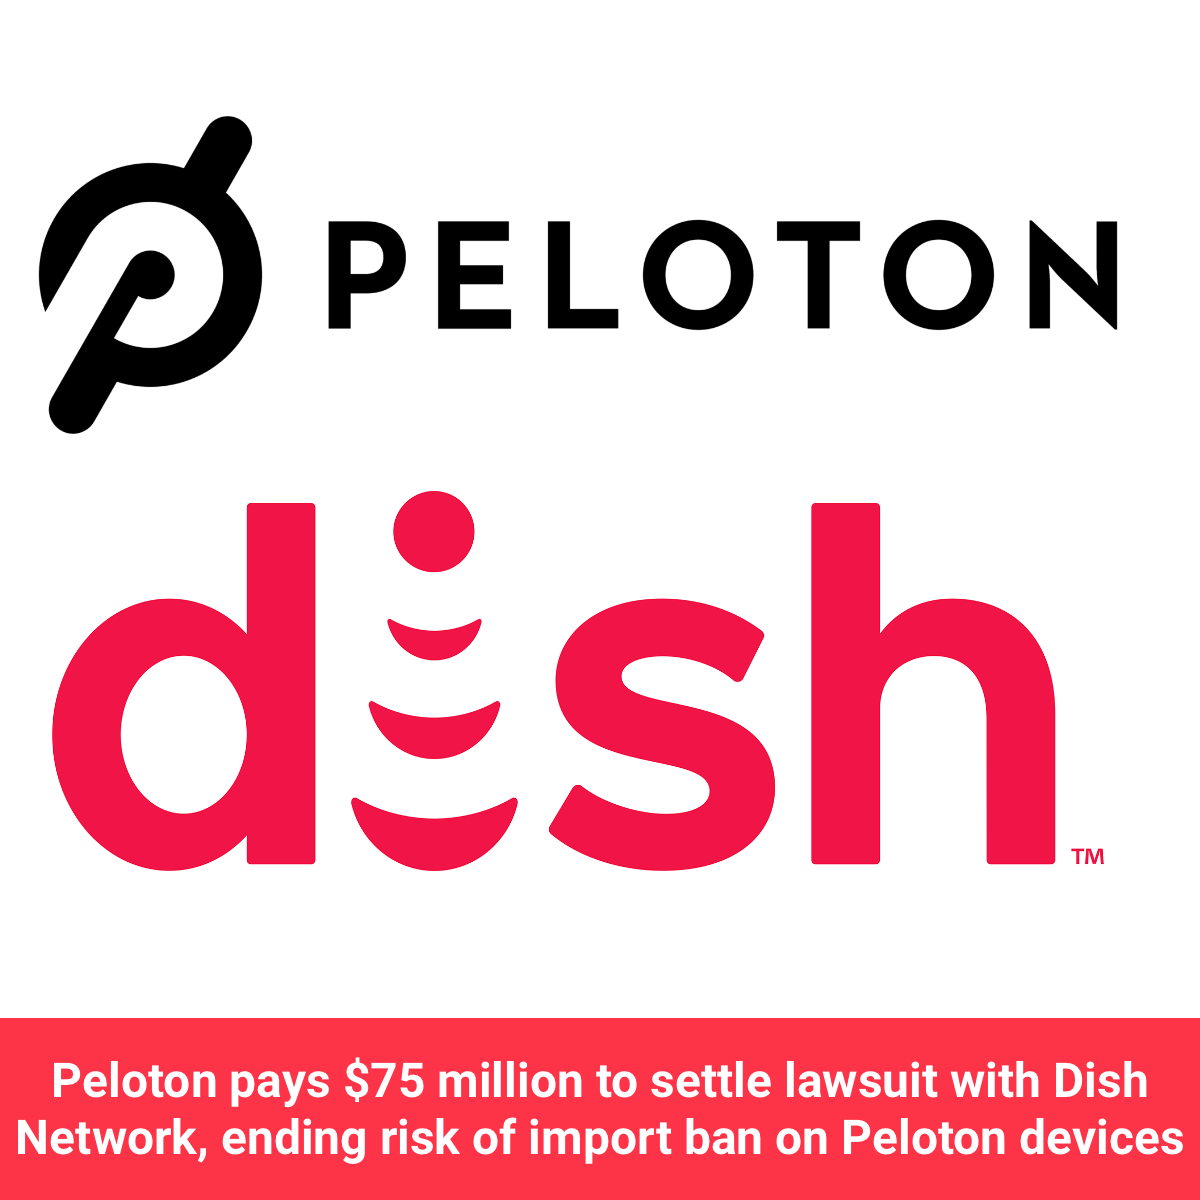 Peloton pays $75 million to settle lawsuit with Dish Network, ending risk of import ban on Peloton devices